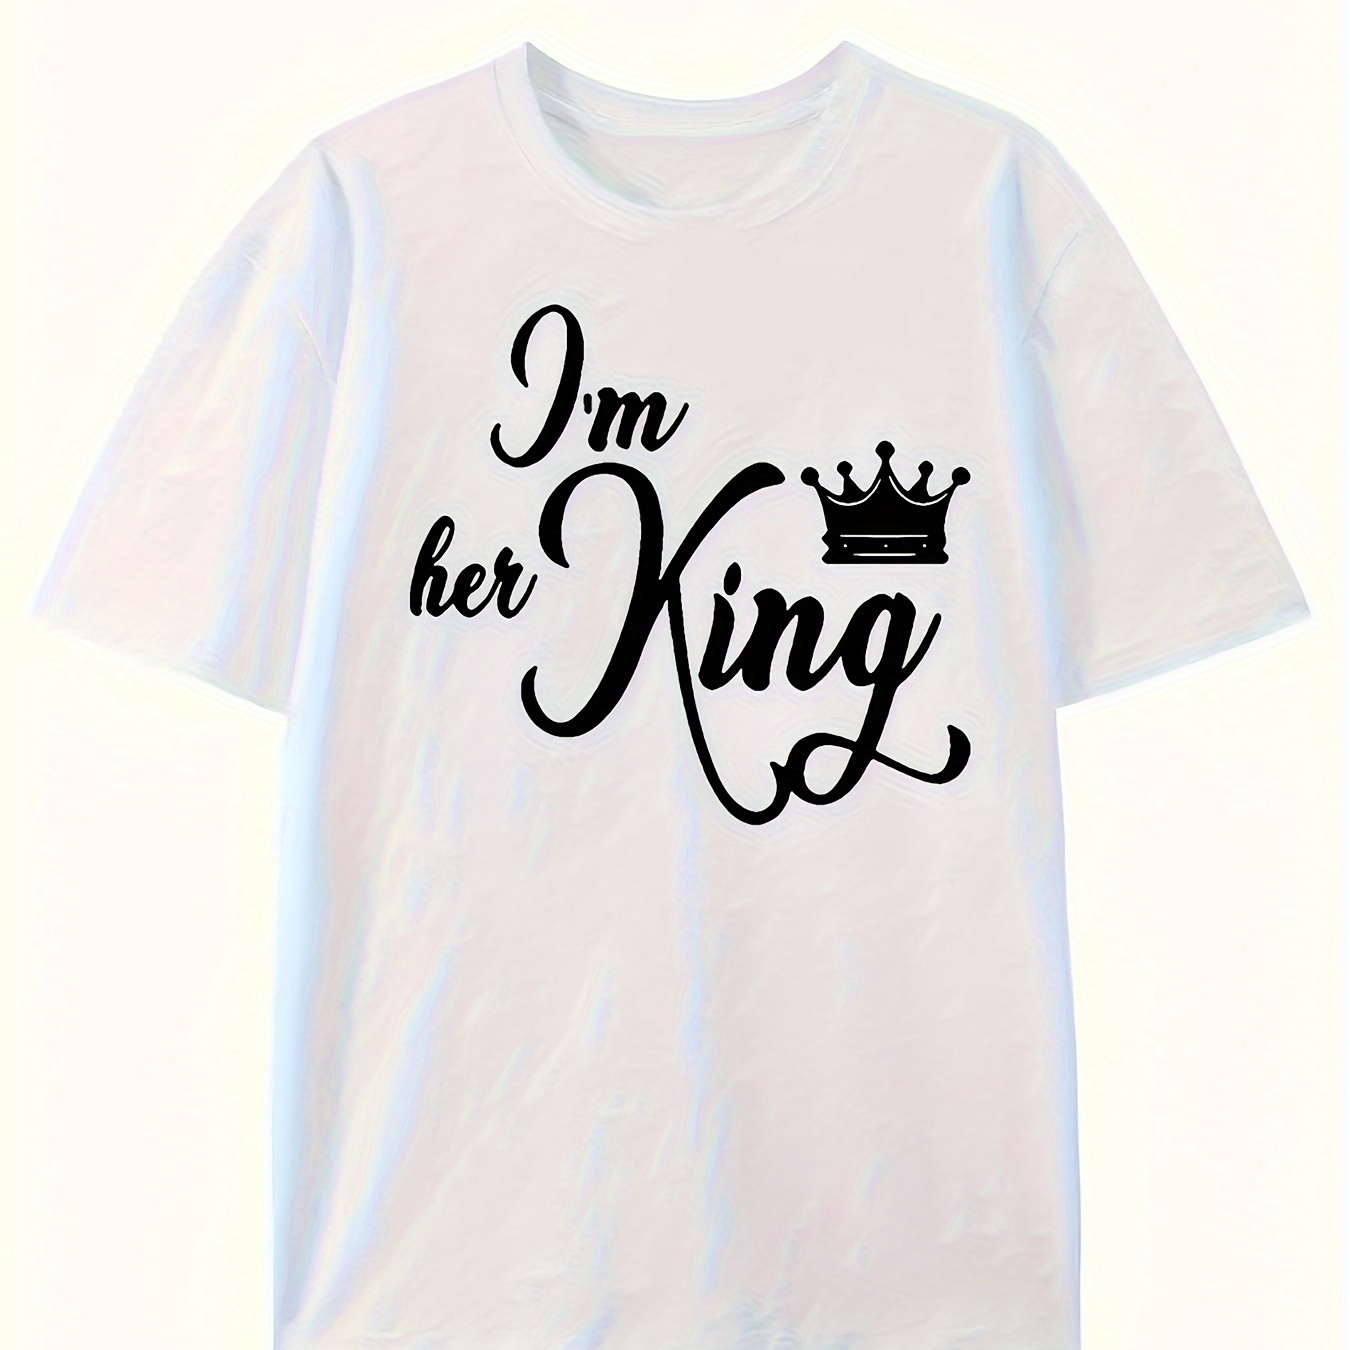 

His Queen&her King Print Men's Round Neck Short Sleeve Tee Fashion Slim Fit Pure Cotton T-shirt Top For Spring Summer Holiday